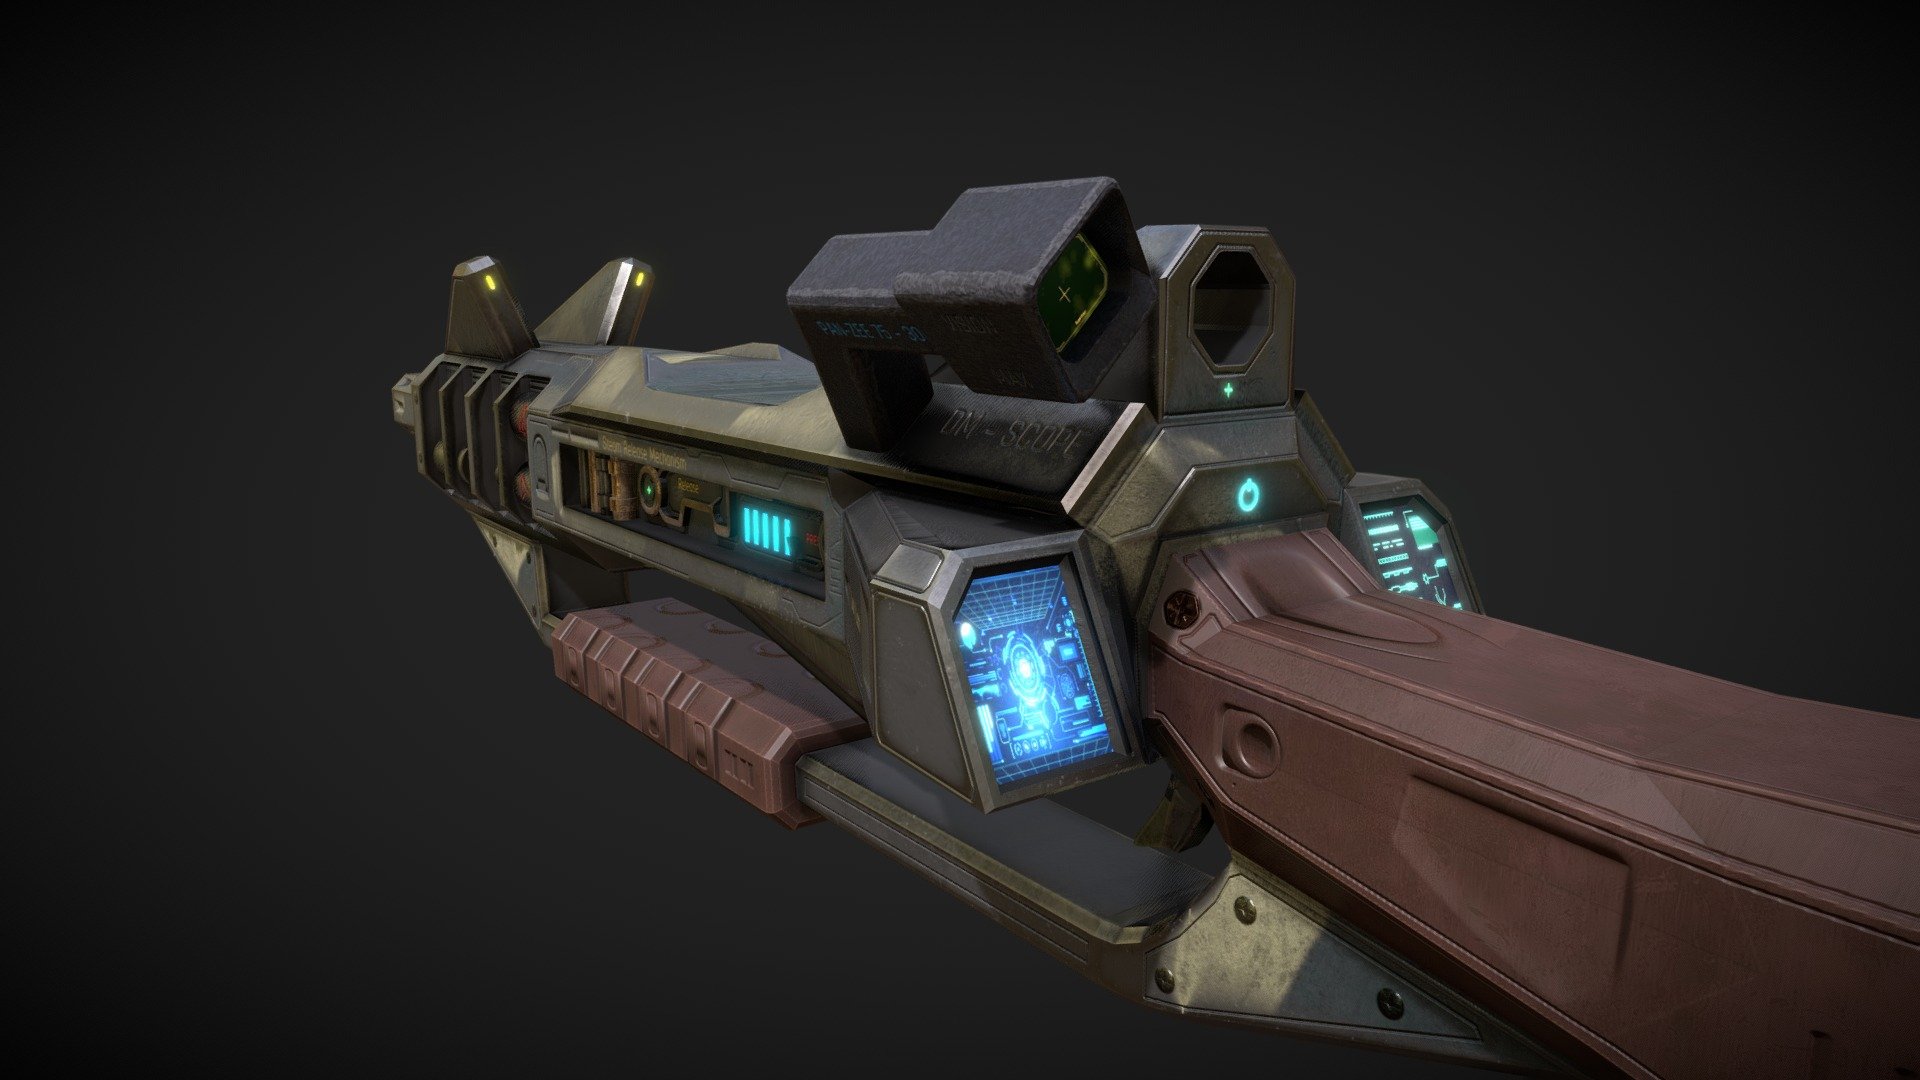 VIPER FANG BLASTERGUN is ready to be used in any game development purpose or comercial / personal production use and FILM VFX

Weapon Description:- FUTURISTIC - VIPERFANG BLASTER
WEAPON Model : EMISSIVE FORCE
SCOPE : DM VISION
SCOPE Field: PAN ZEE 75 - 300
Granade Launcher : N/A
Mechanism: Steam Release Mechanism
Manufacturer: 3D World Weapon
Designed By : Vijayasarathi

Low Poly High Detail Modeling and Texturing done For Game Integration / film production , Geometries are seperable Materials and Textures

Meshes can be seperated and rigged according to your requirements of your projects

THis VIPER FANG Can Be can be used FPS/TPS Style Games (Ease of USe) and for Sci- Fi Movie Production

Clients and customers who uses this model for your work of art please give your valuable Review and inputs

Please Give Your Valuable Feedback AfterPurchase Which Will Help ! don’t forget to give your ratings and hit those stars would really appriciate it thanks in advance 3d model